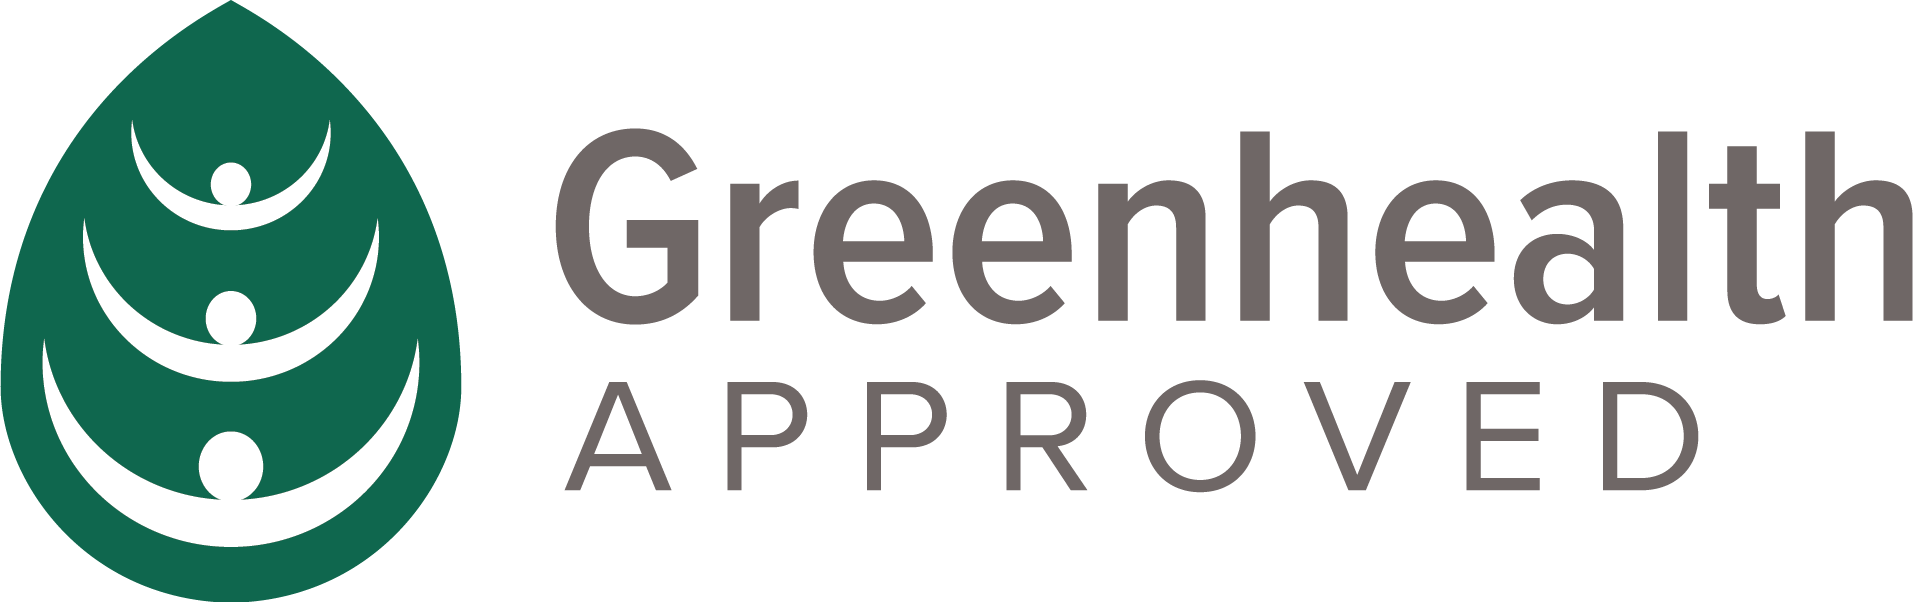 Greenhealth Approved seal